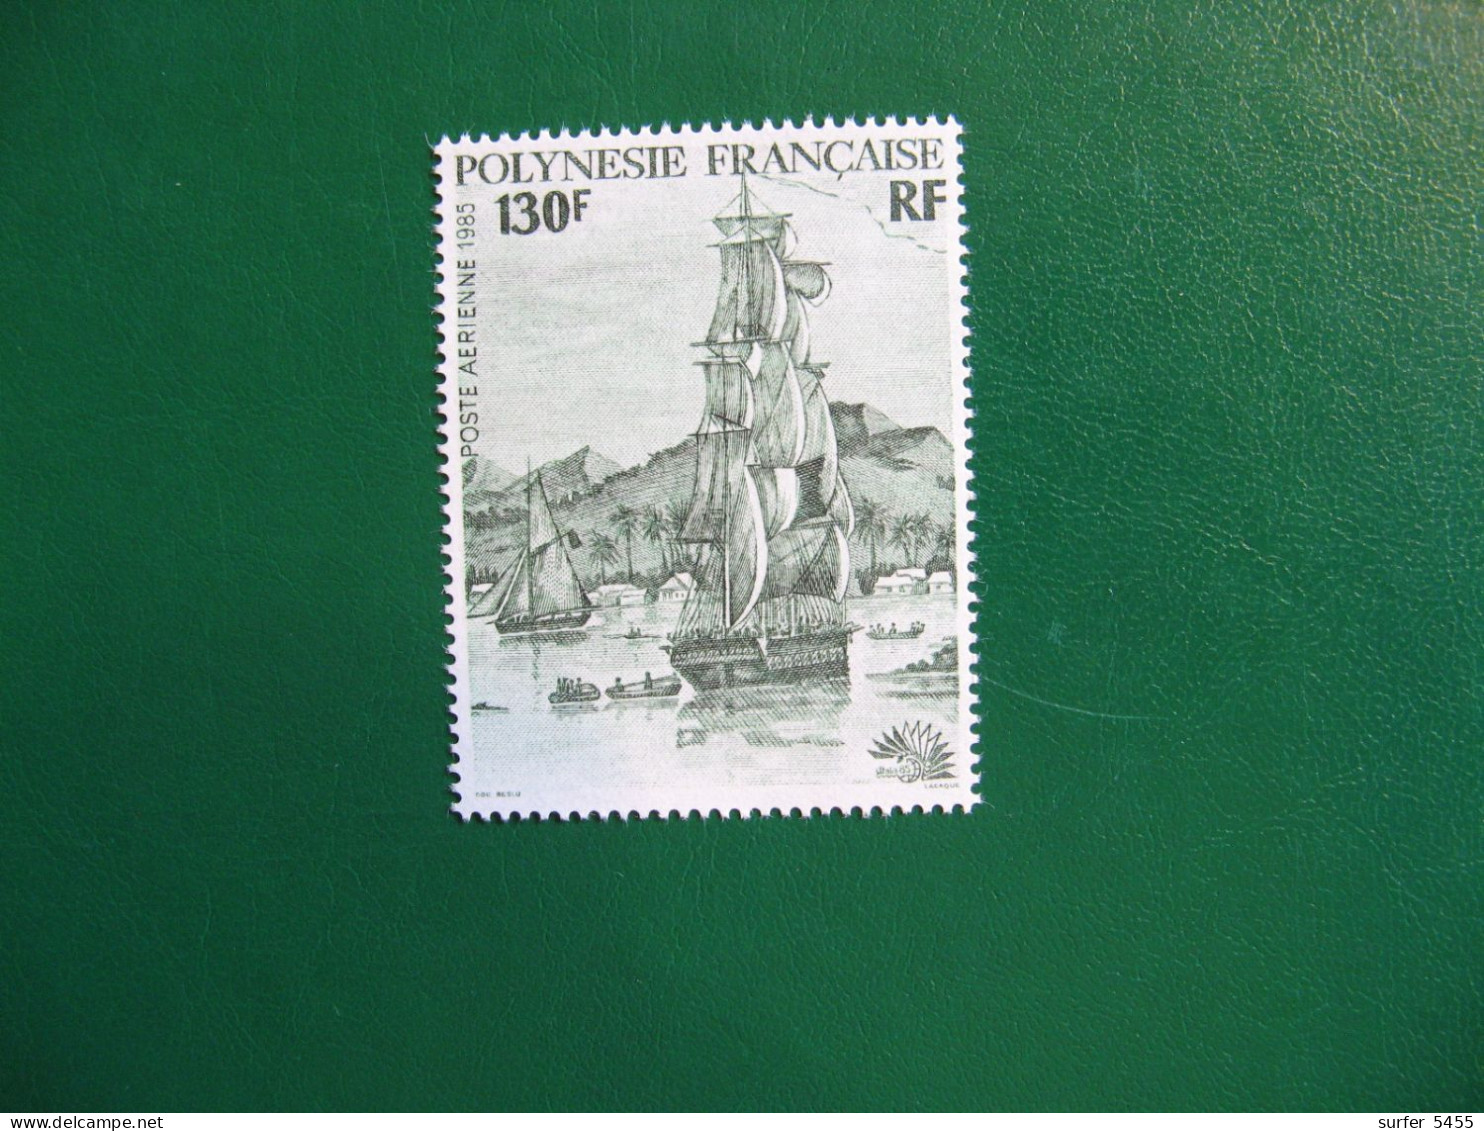 P0LYNESIE PO AERIENNE N° 189 TIMBRE NEUF ** LUXE - MNH - SERIE COMPLETE - FACIALE 1,09 EURO - Unused Stamps